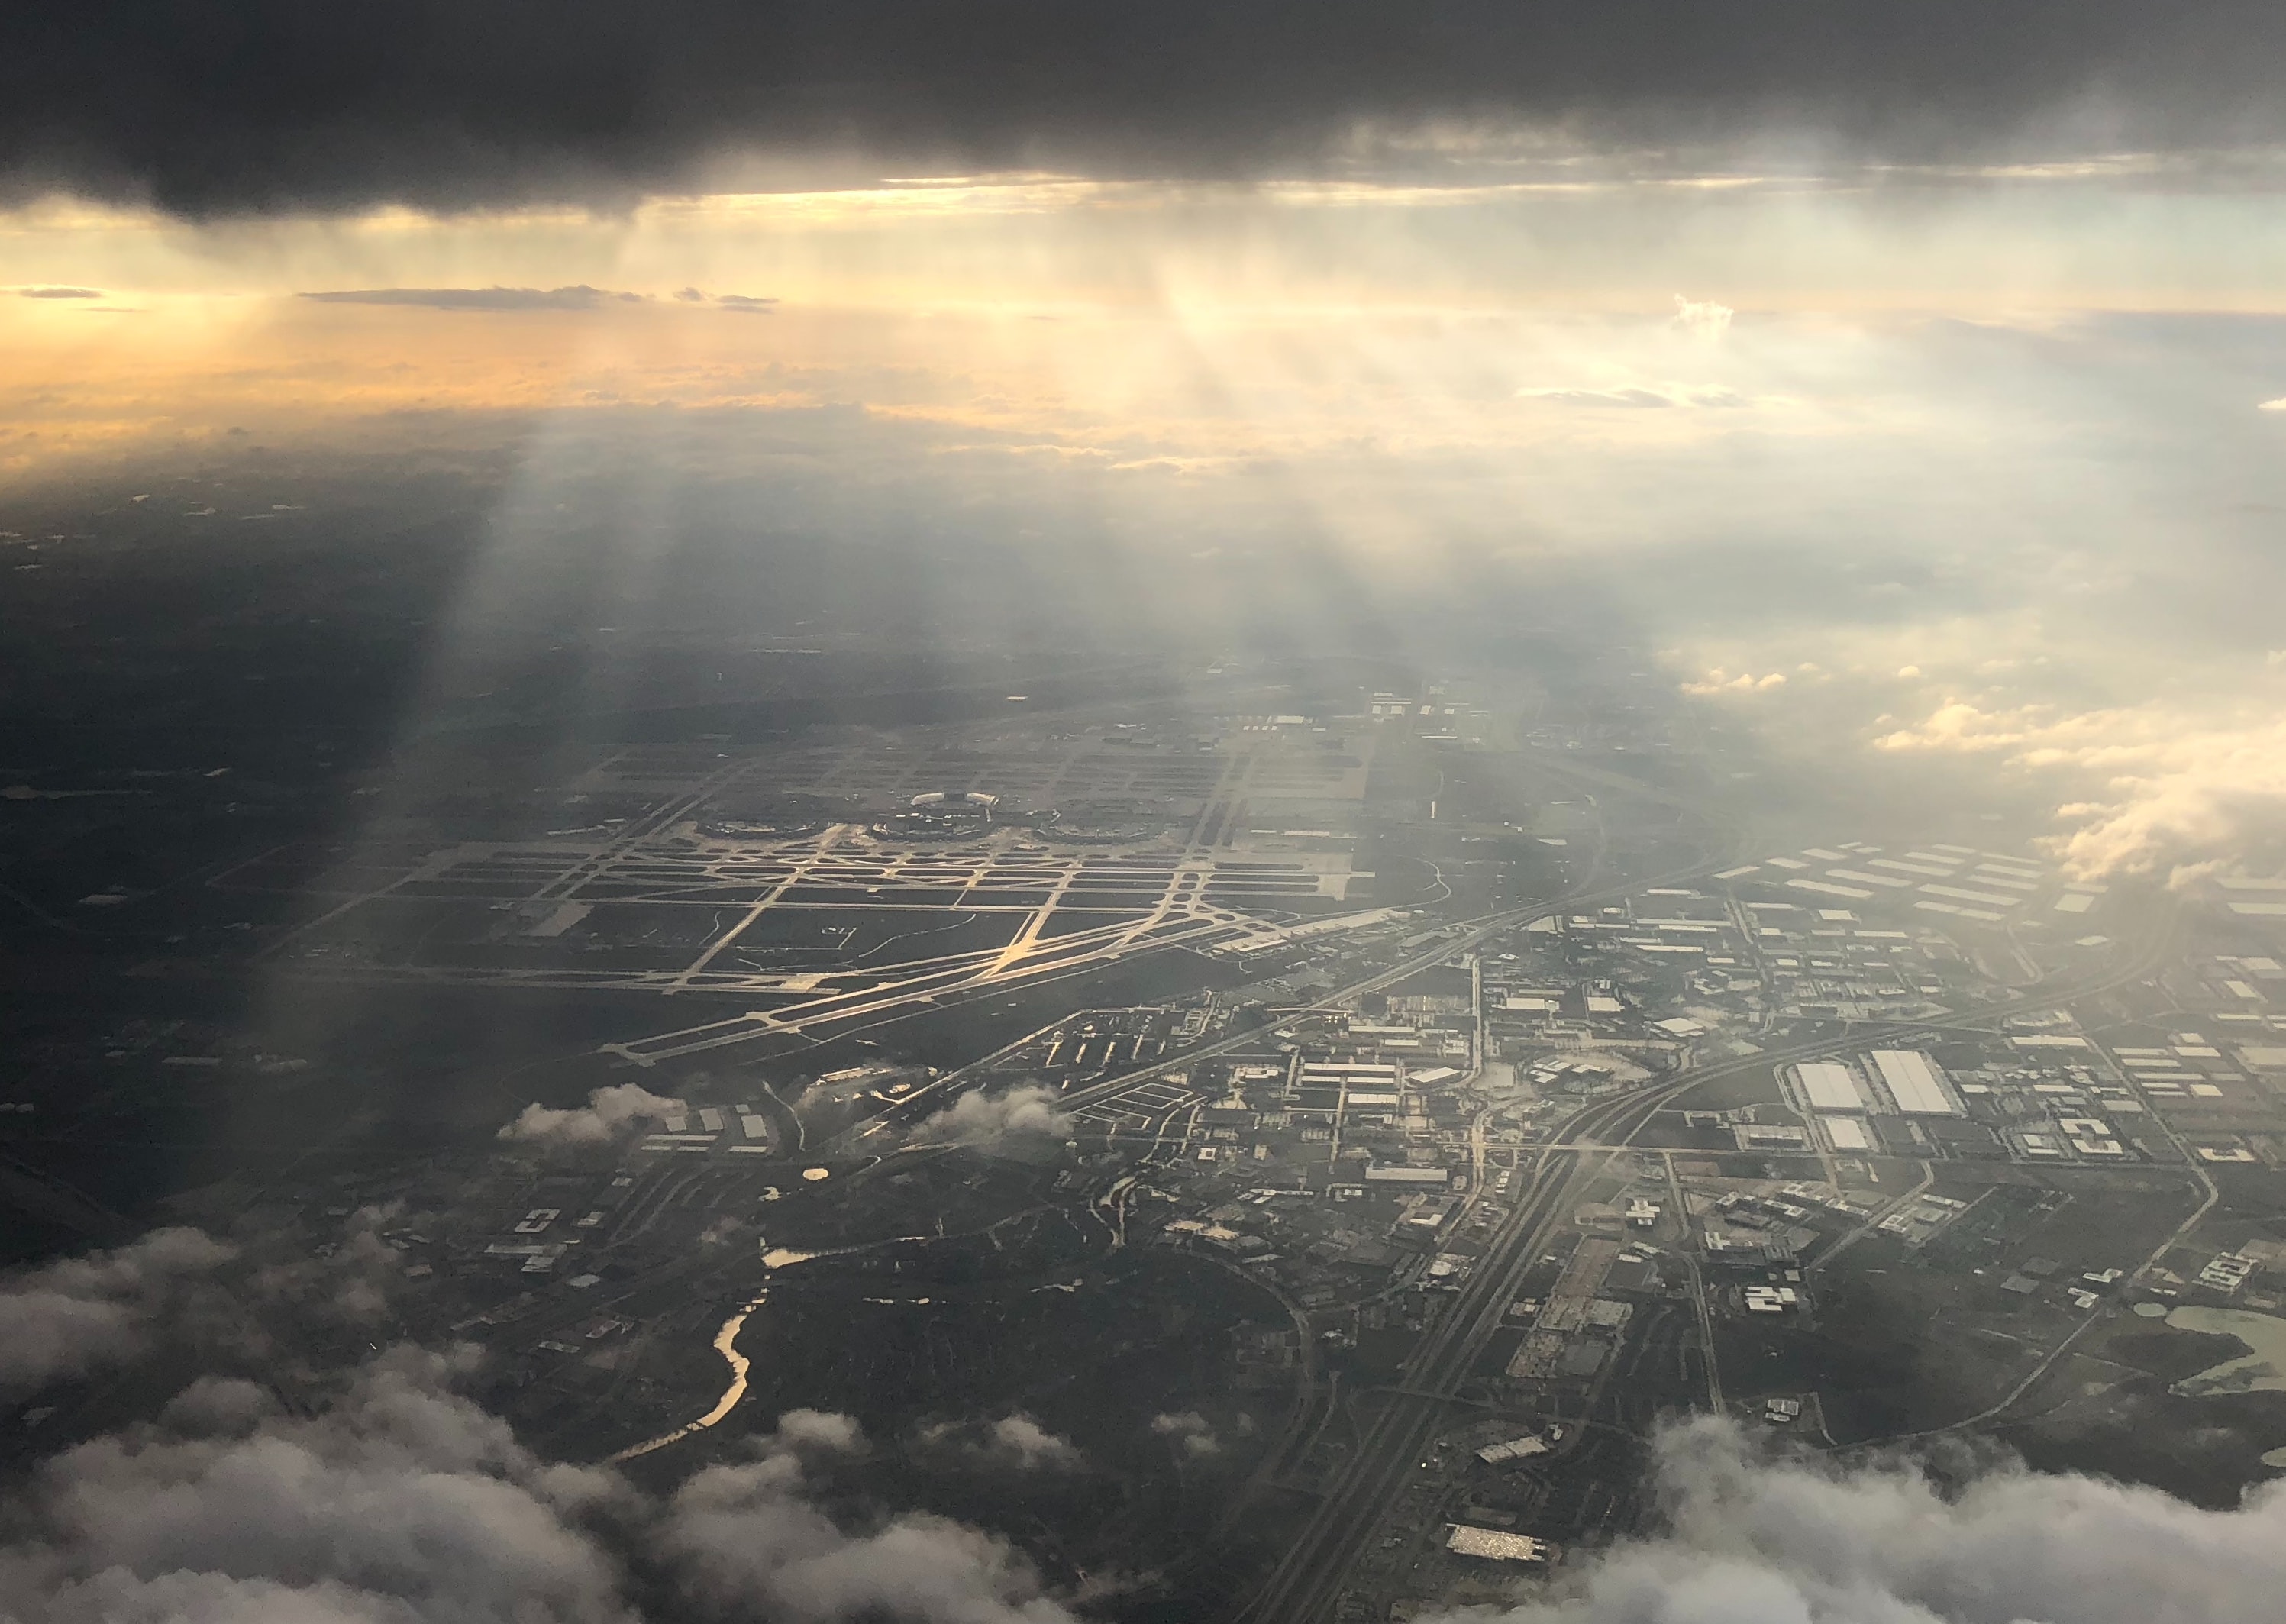 dfw airport with clouds